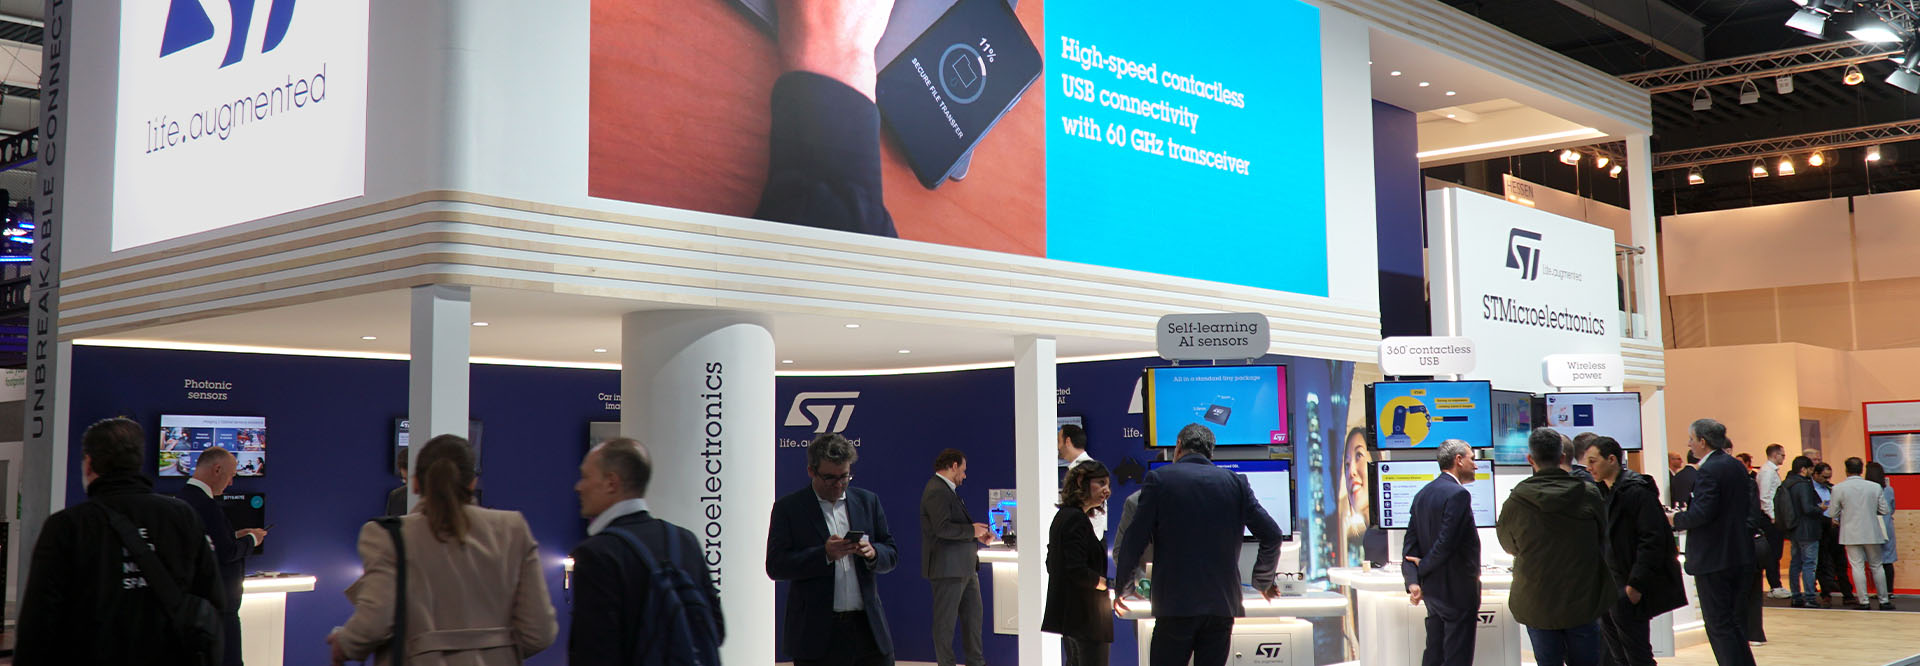 The ST stand at a tradeshow (photo)